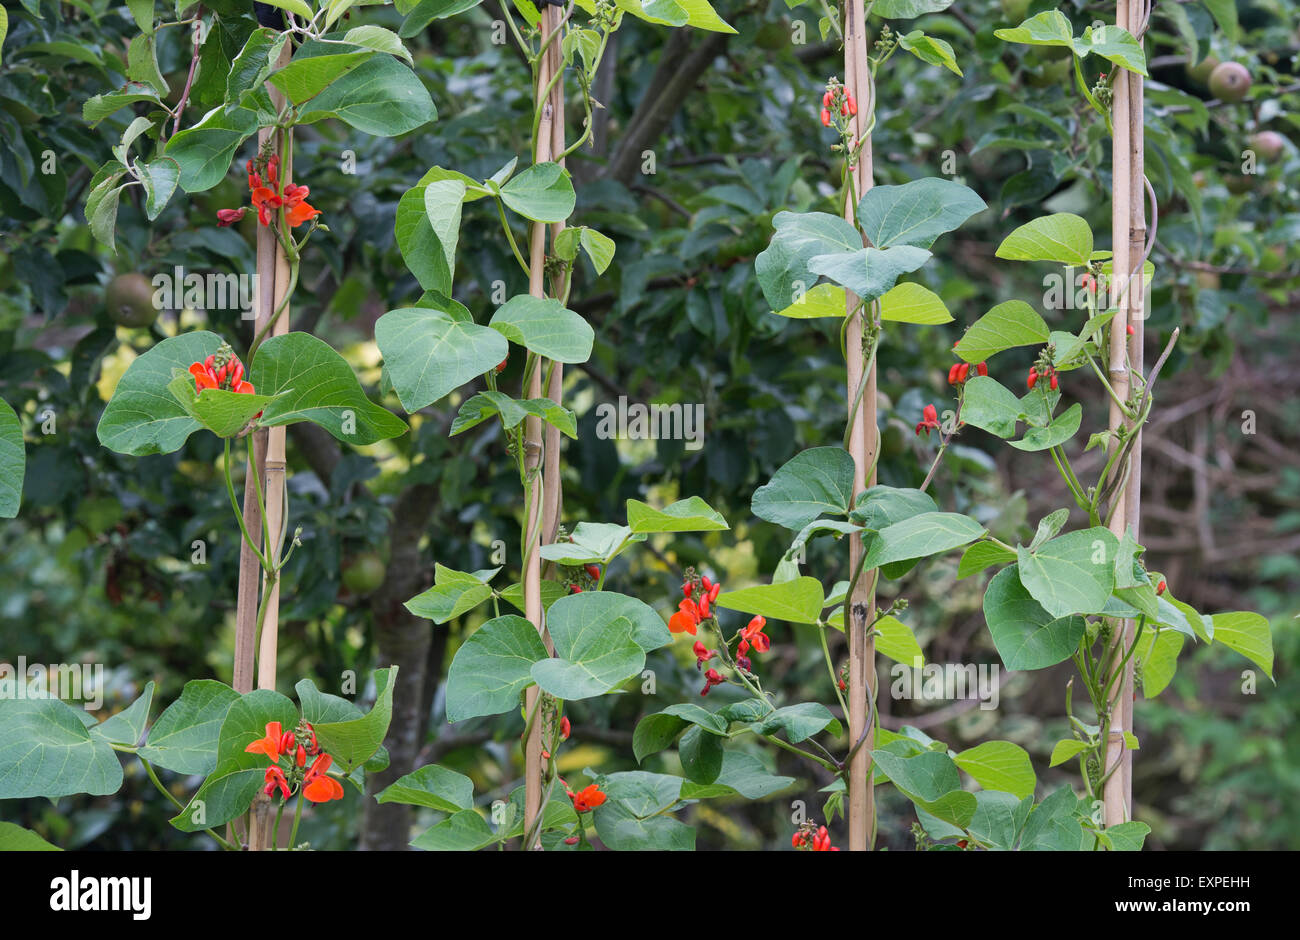 Phaseolus coccineus. Flowering runner bean plants climbing up bamboo canes Stock Photo